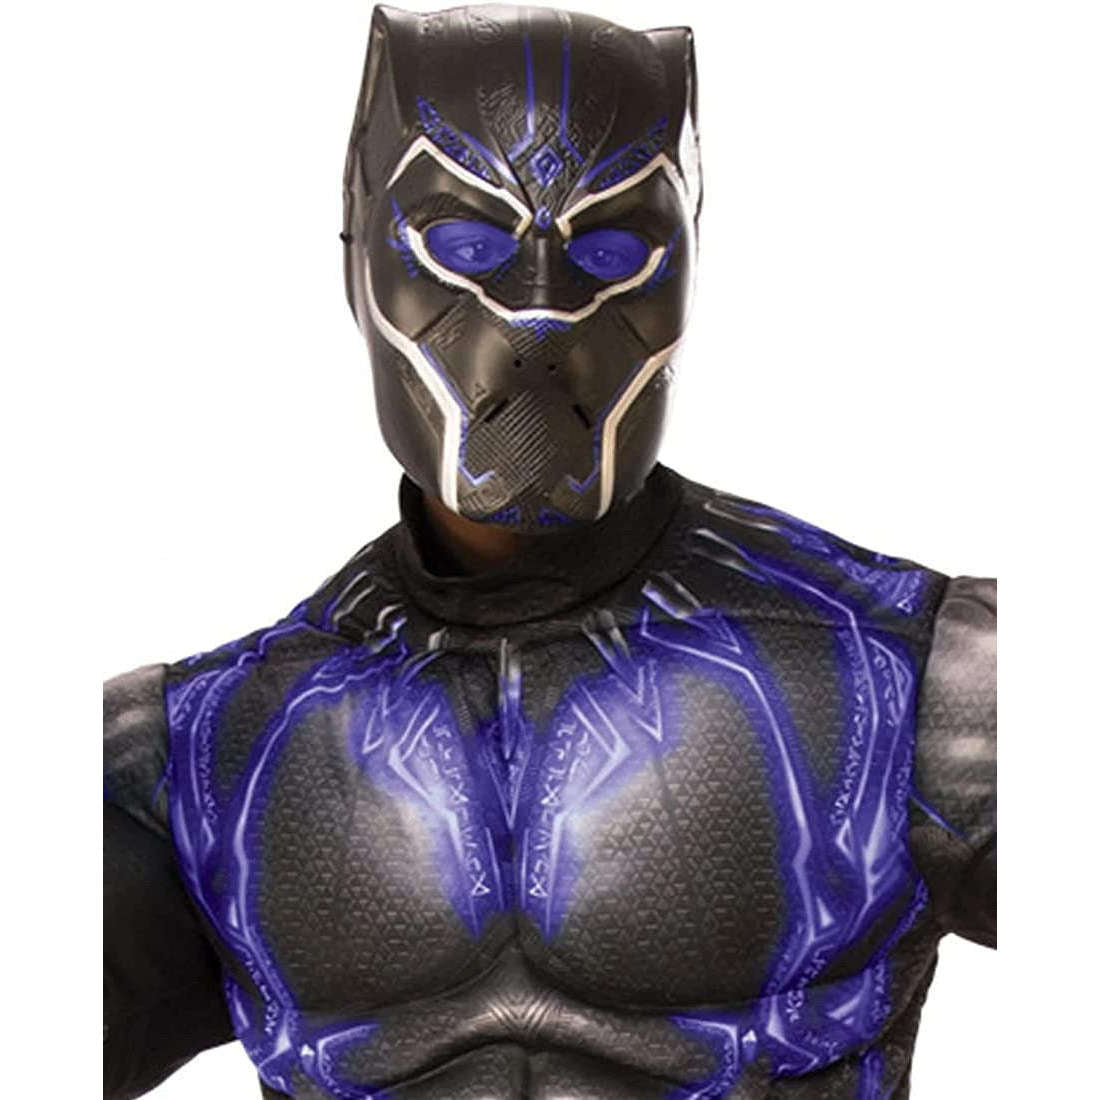 Black Panther's costume hides a sweet message